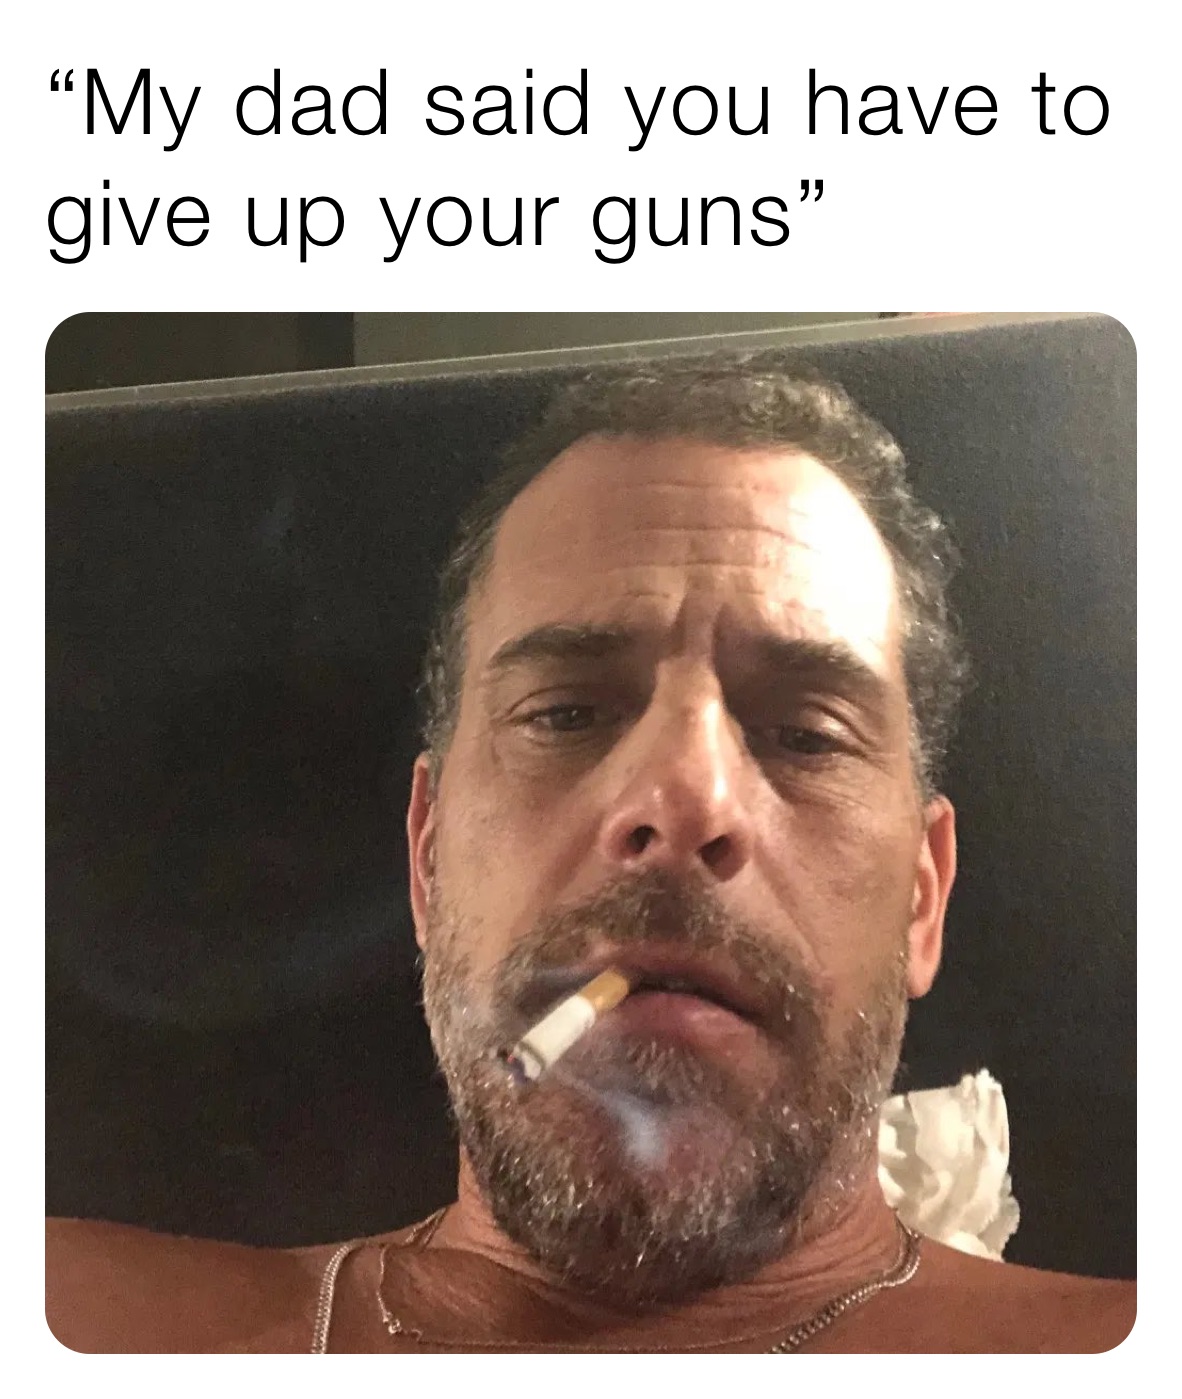 “My dad said you have to give up your guns”